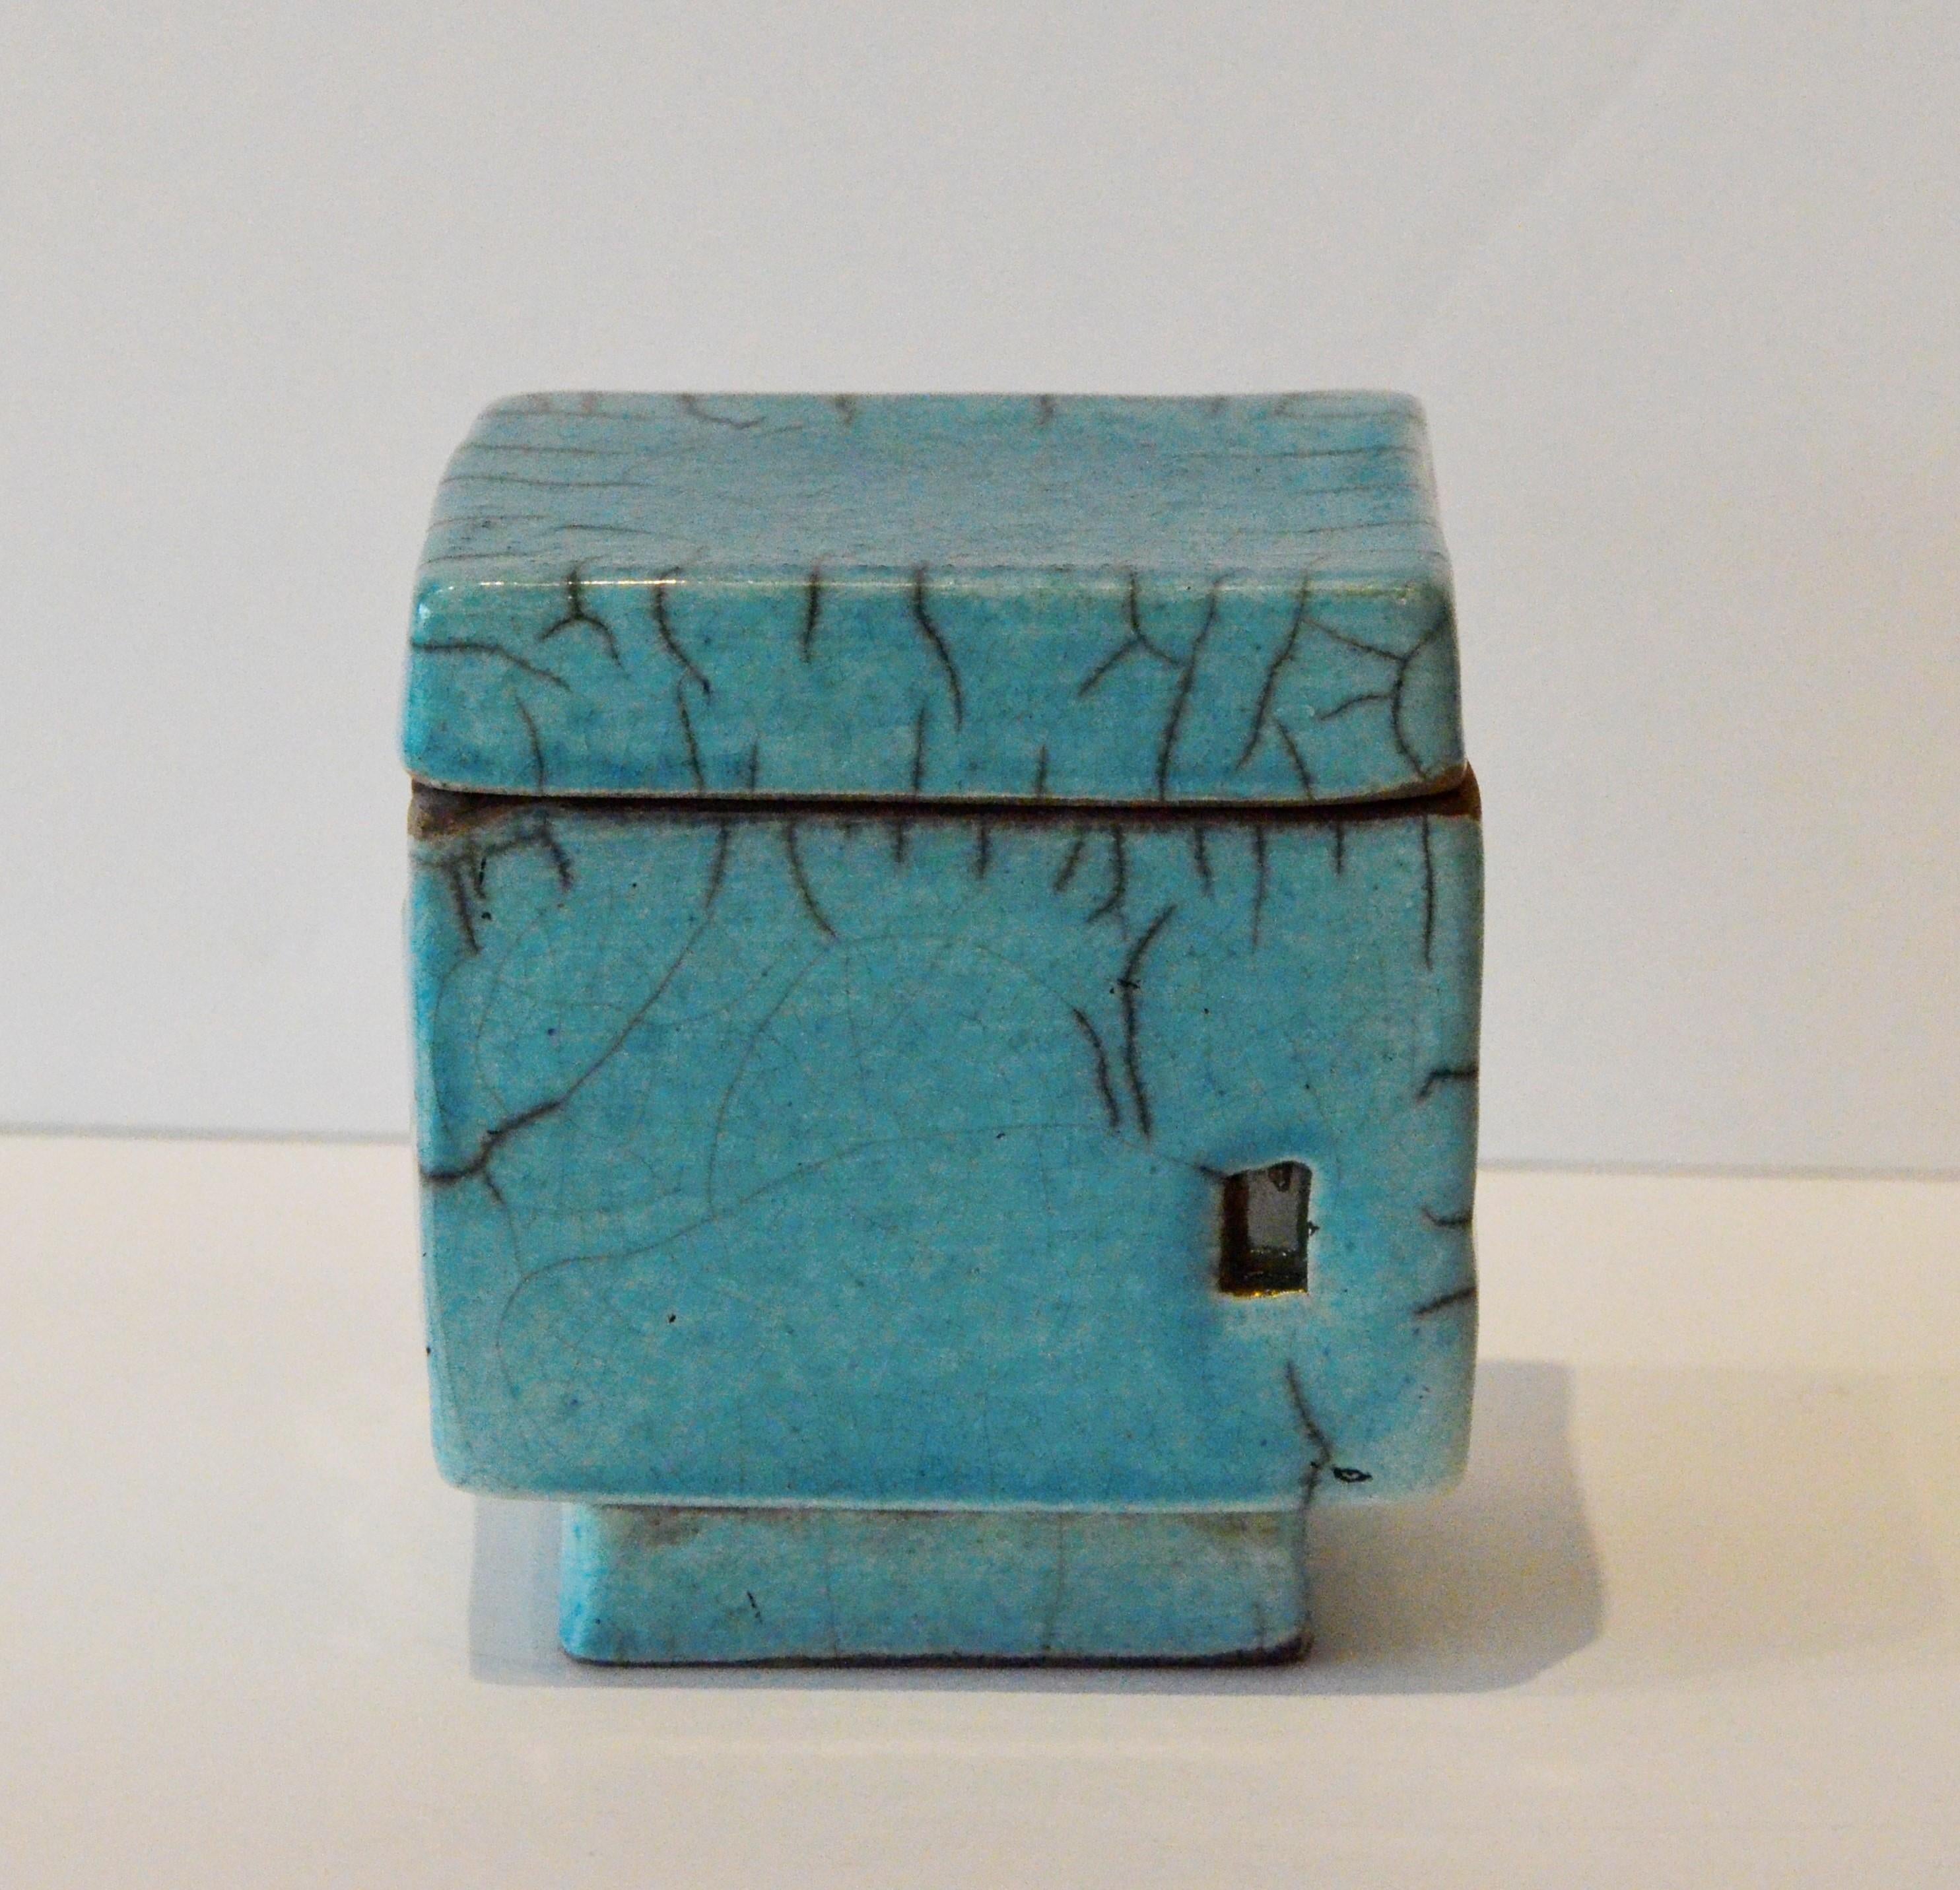 Offered is a Mid-Century Modern signed E Simpson, (possibly Elisa-the as the first name is illegible,) stamped blue clay pottery decorative square trinket box with lid. Not much could be found about the artist as the first name is illegible and